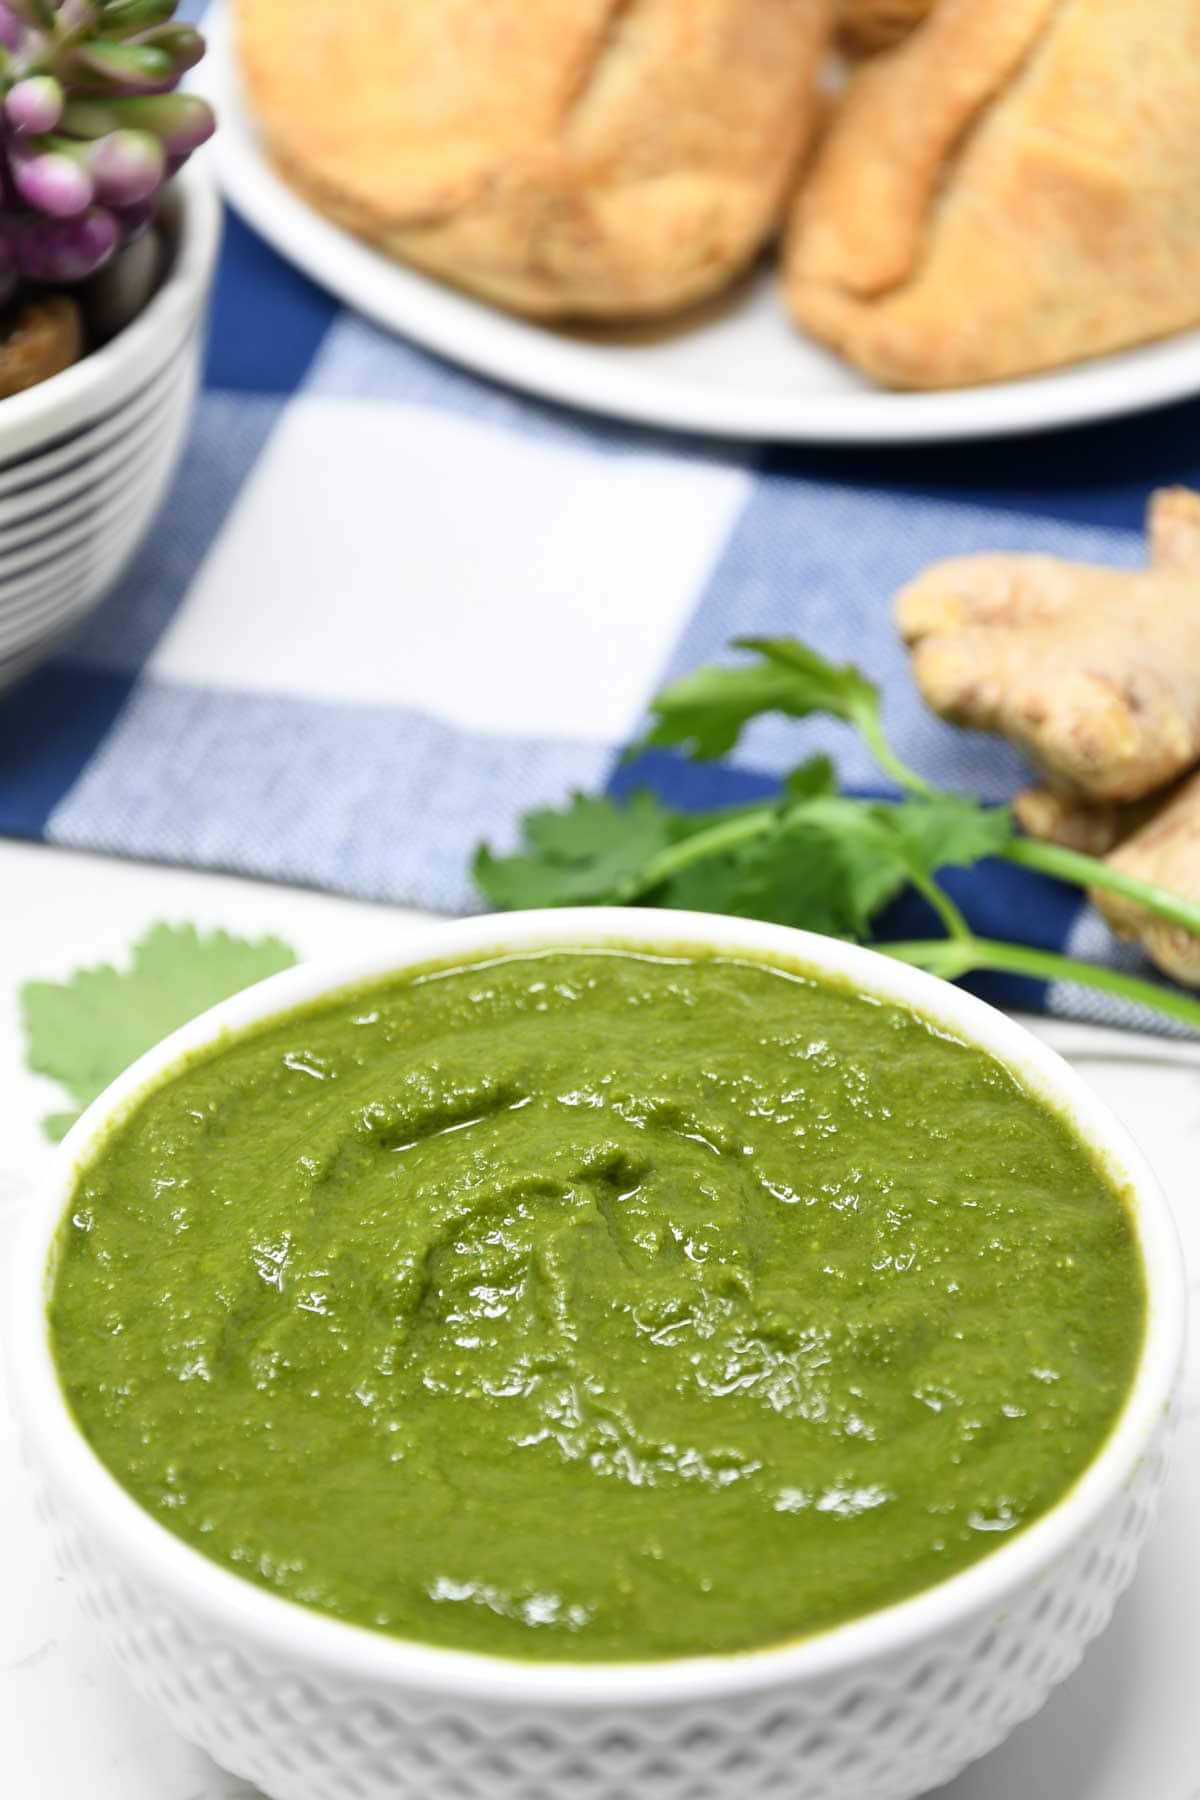 Green chutney served in a bowl.